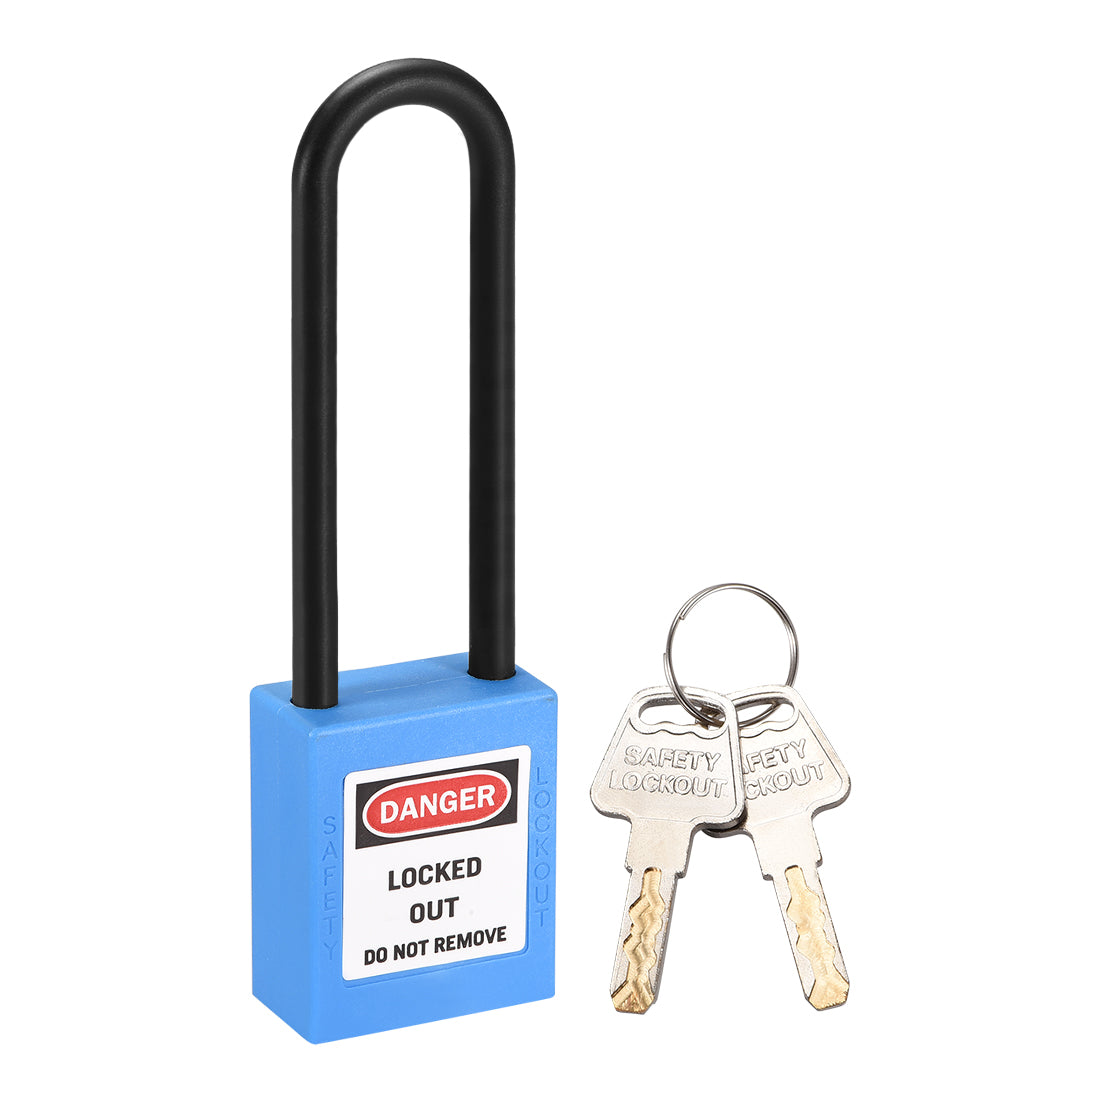 uxcell Uxcell Lockout Tagout Safety Padlock 76mm Nylon Shackle Keyed Different Blue